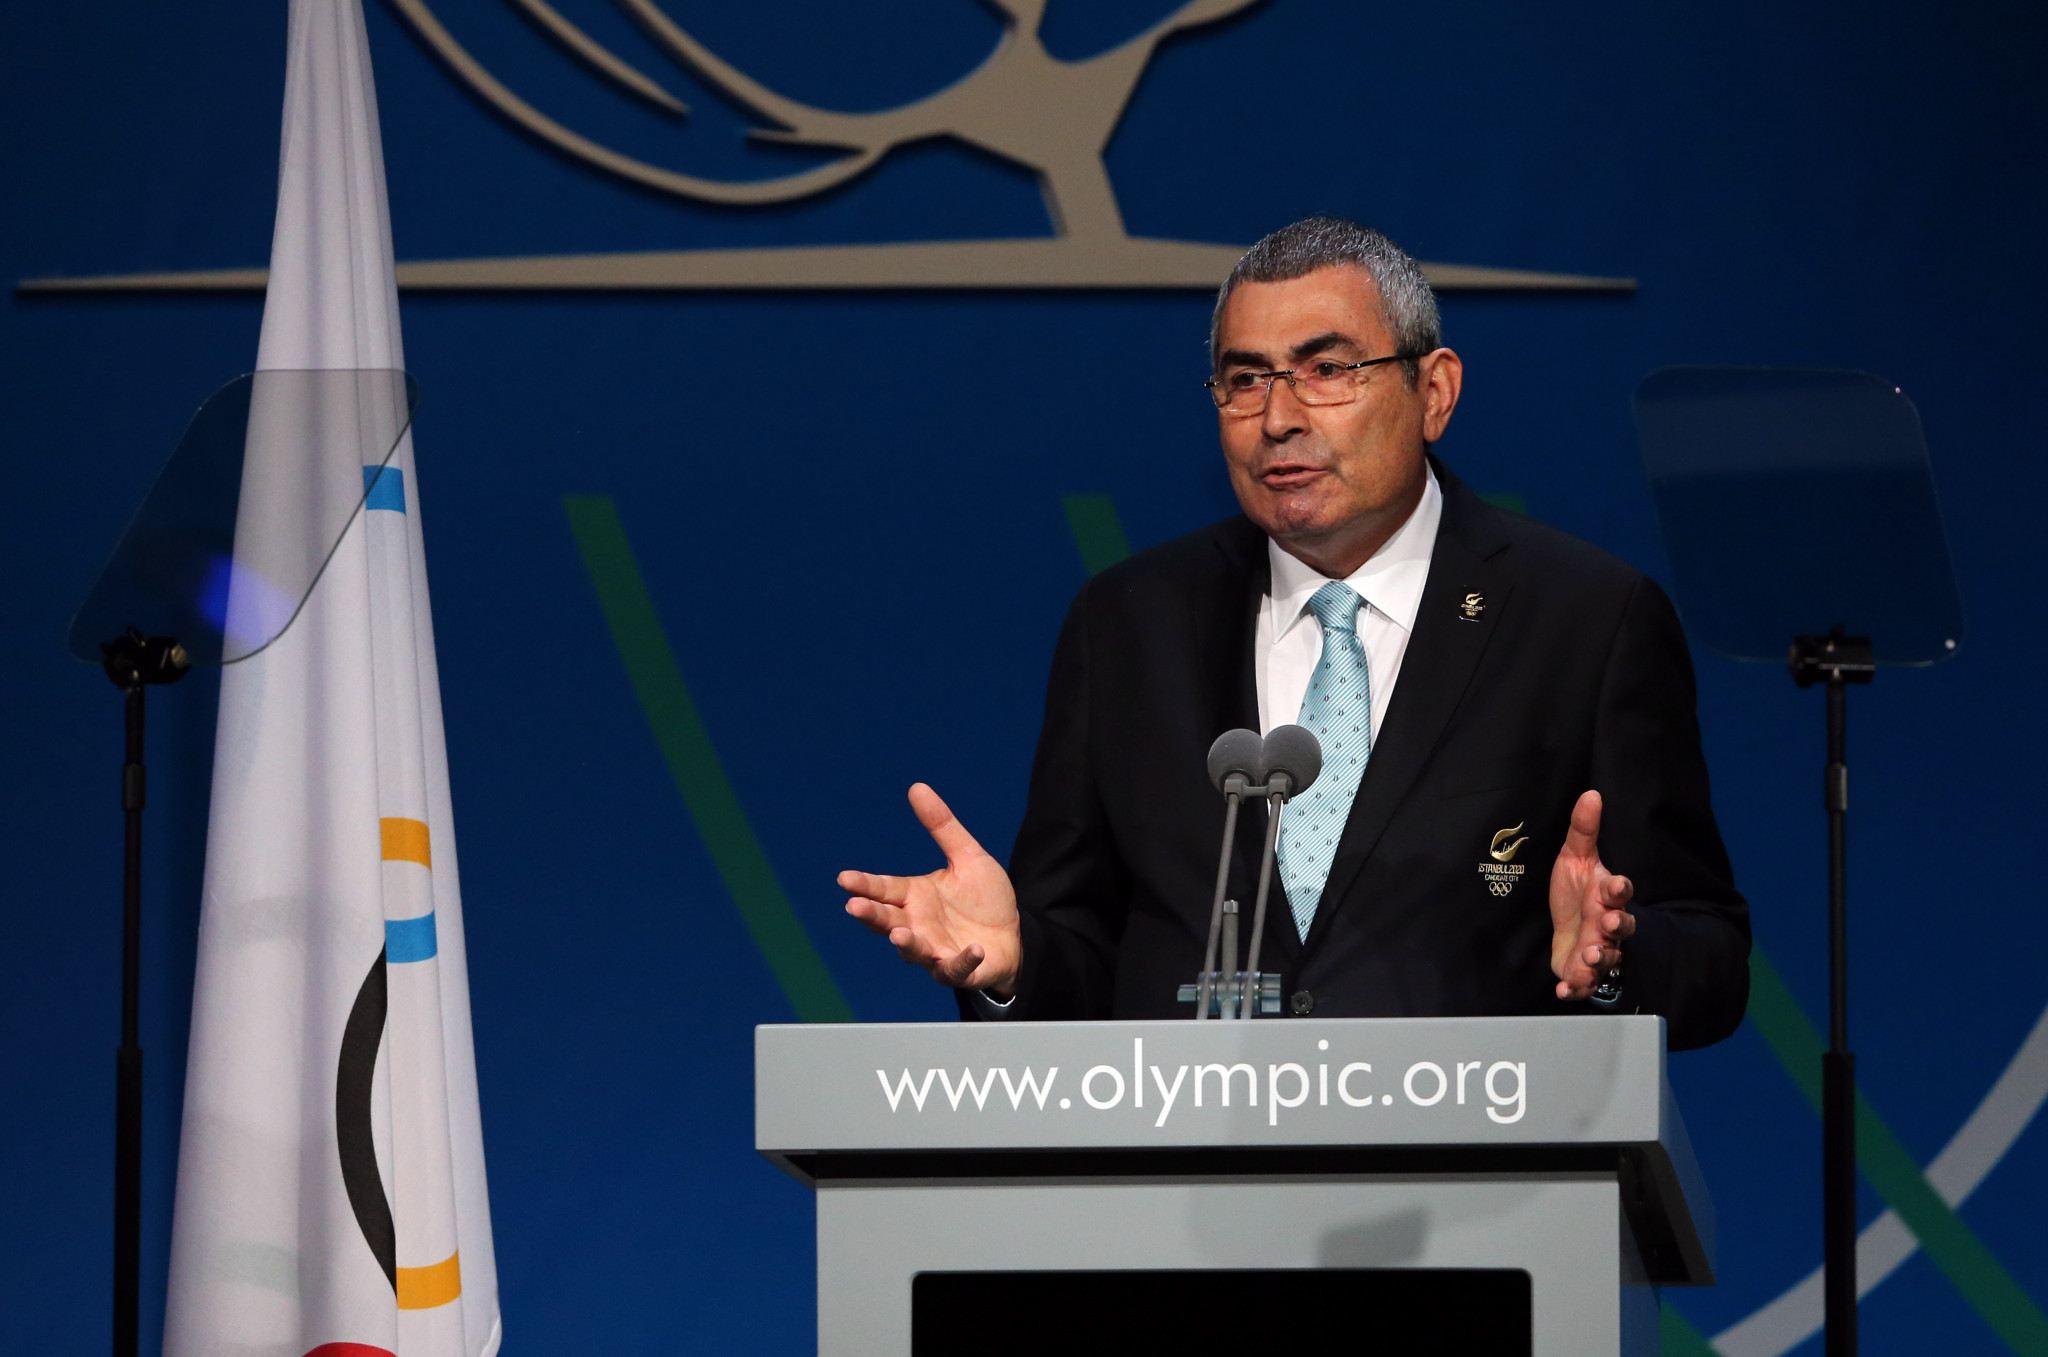 Erdener set to be re-elected as World Archery President as Congress 2021 nominations announced